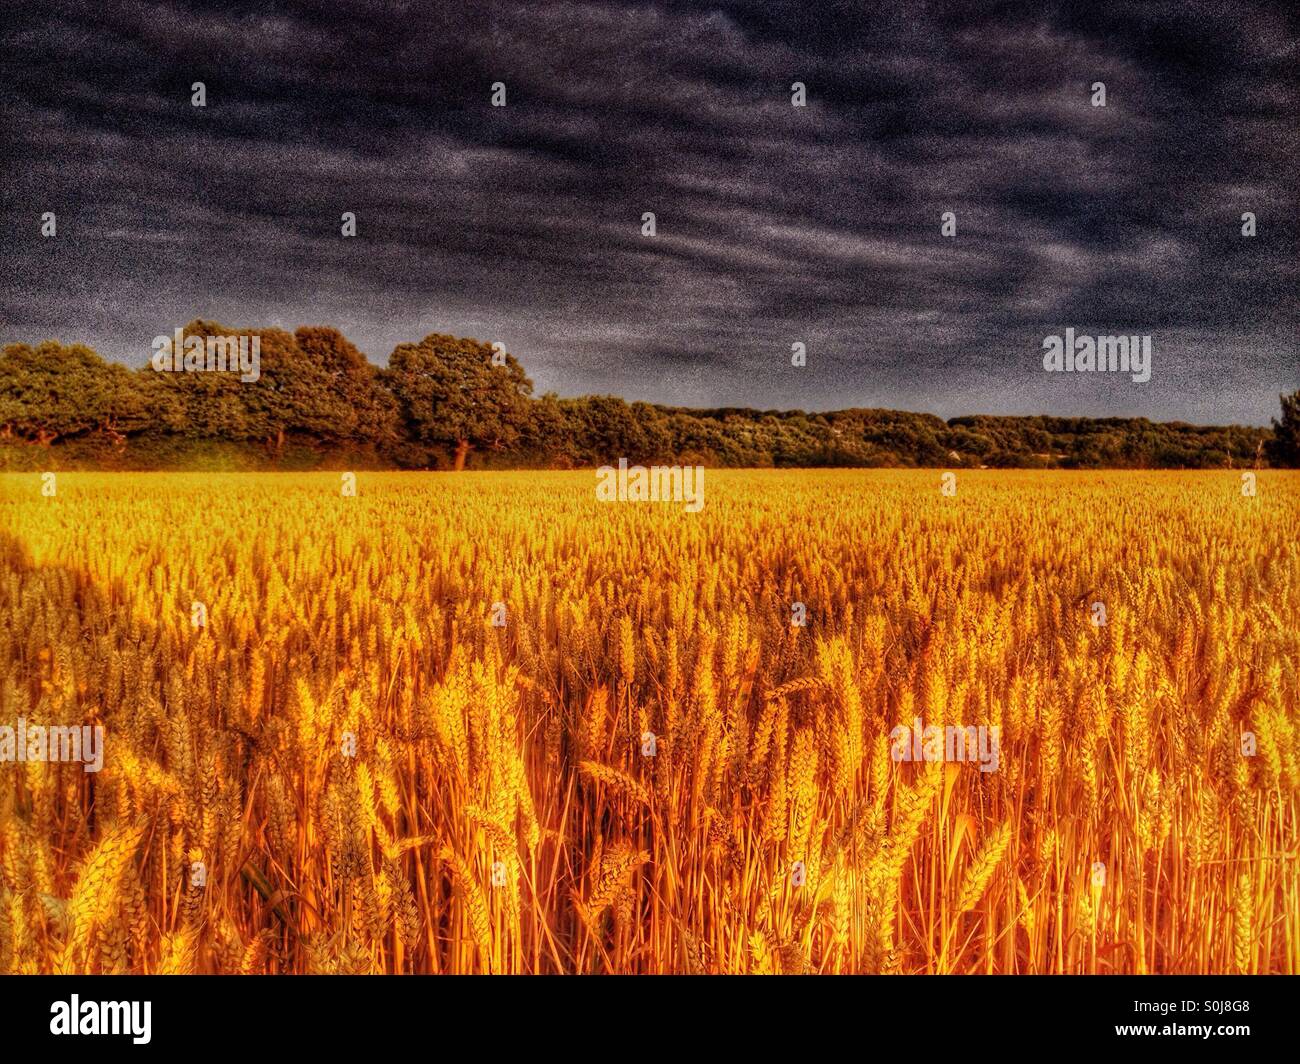 Golden wheat field against a dark stormy sky Stock Photo